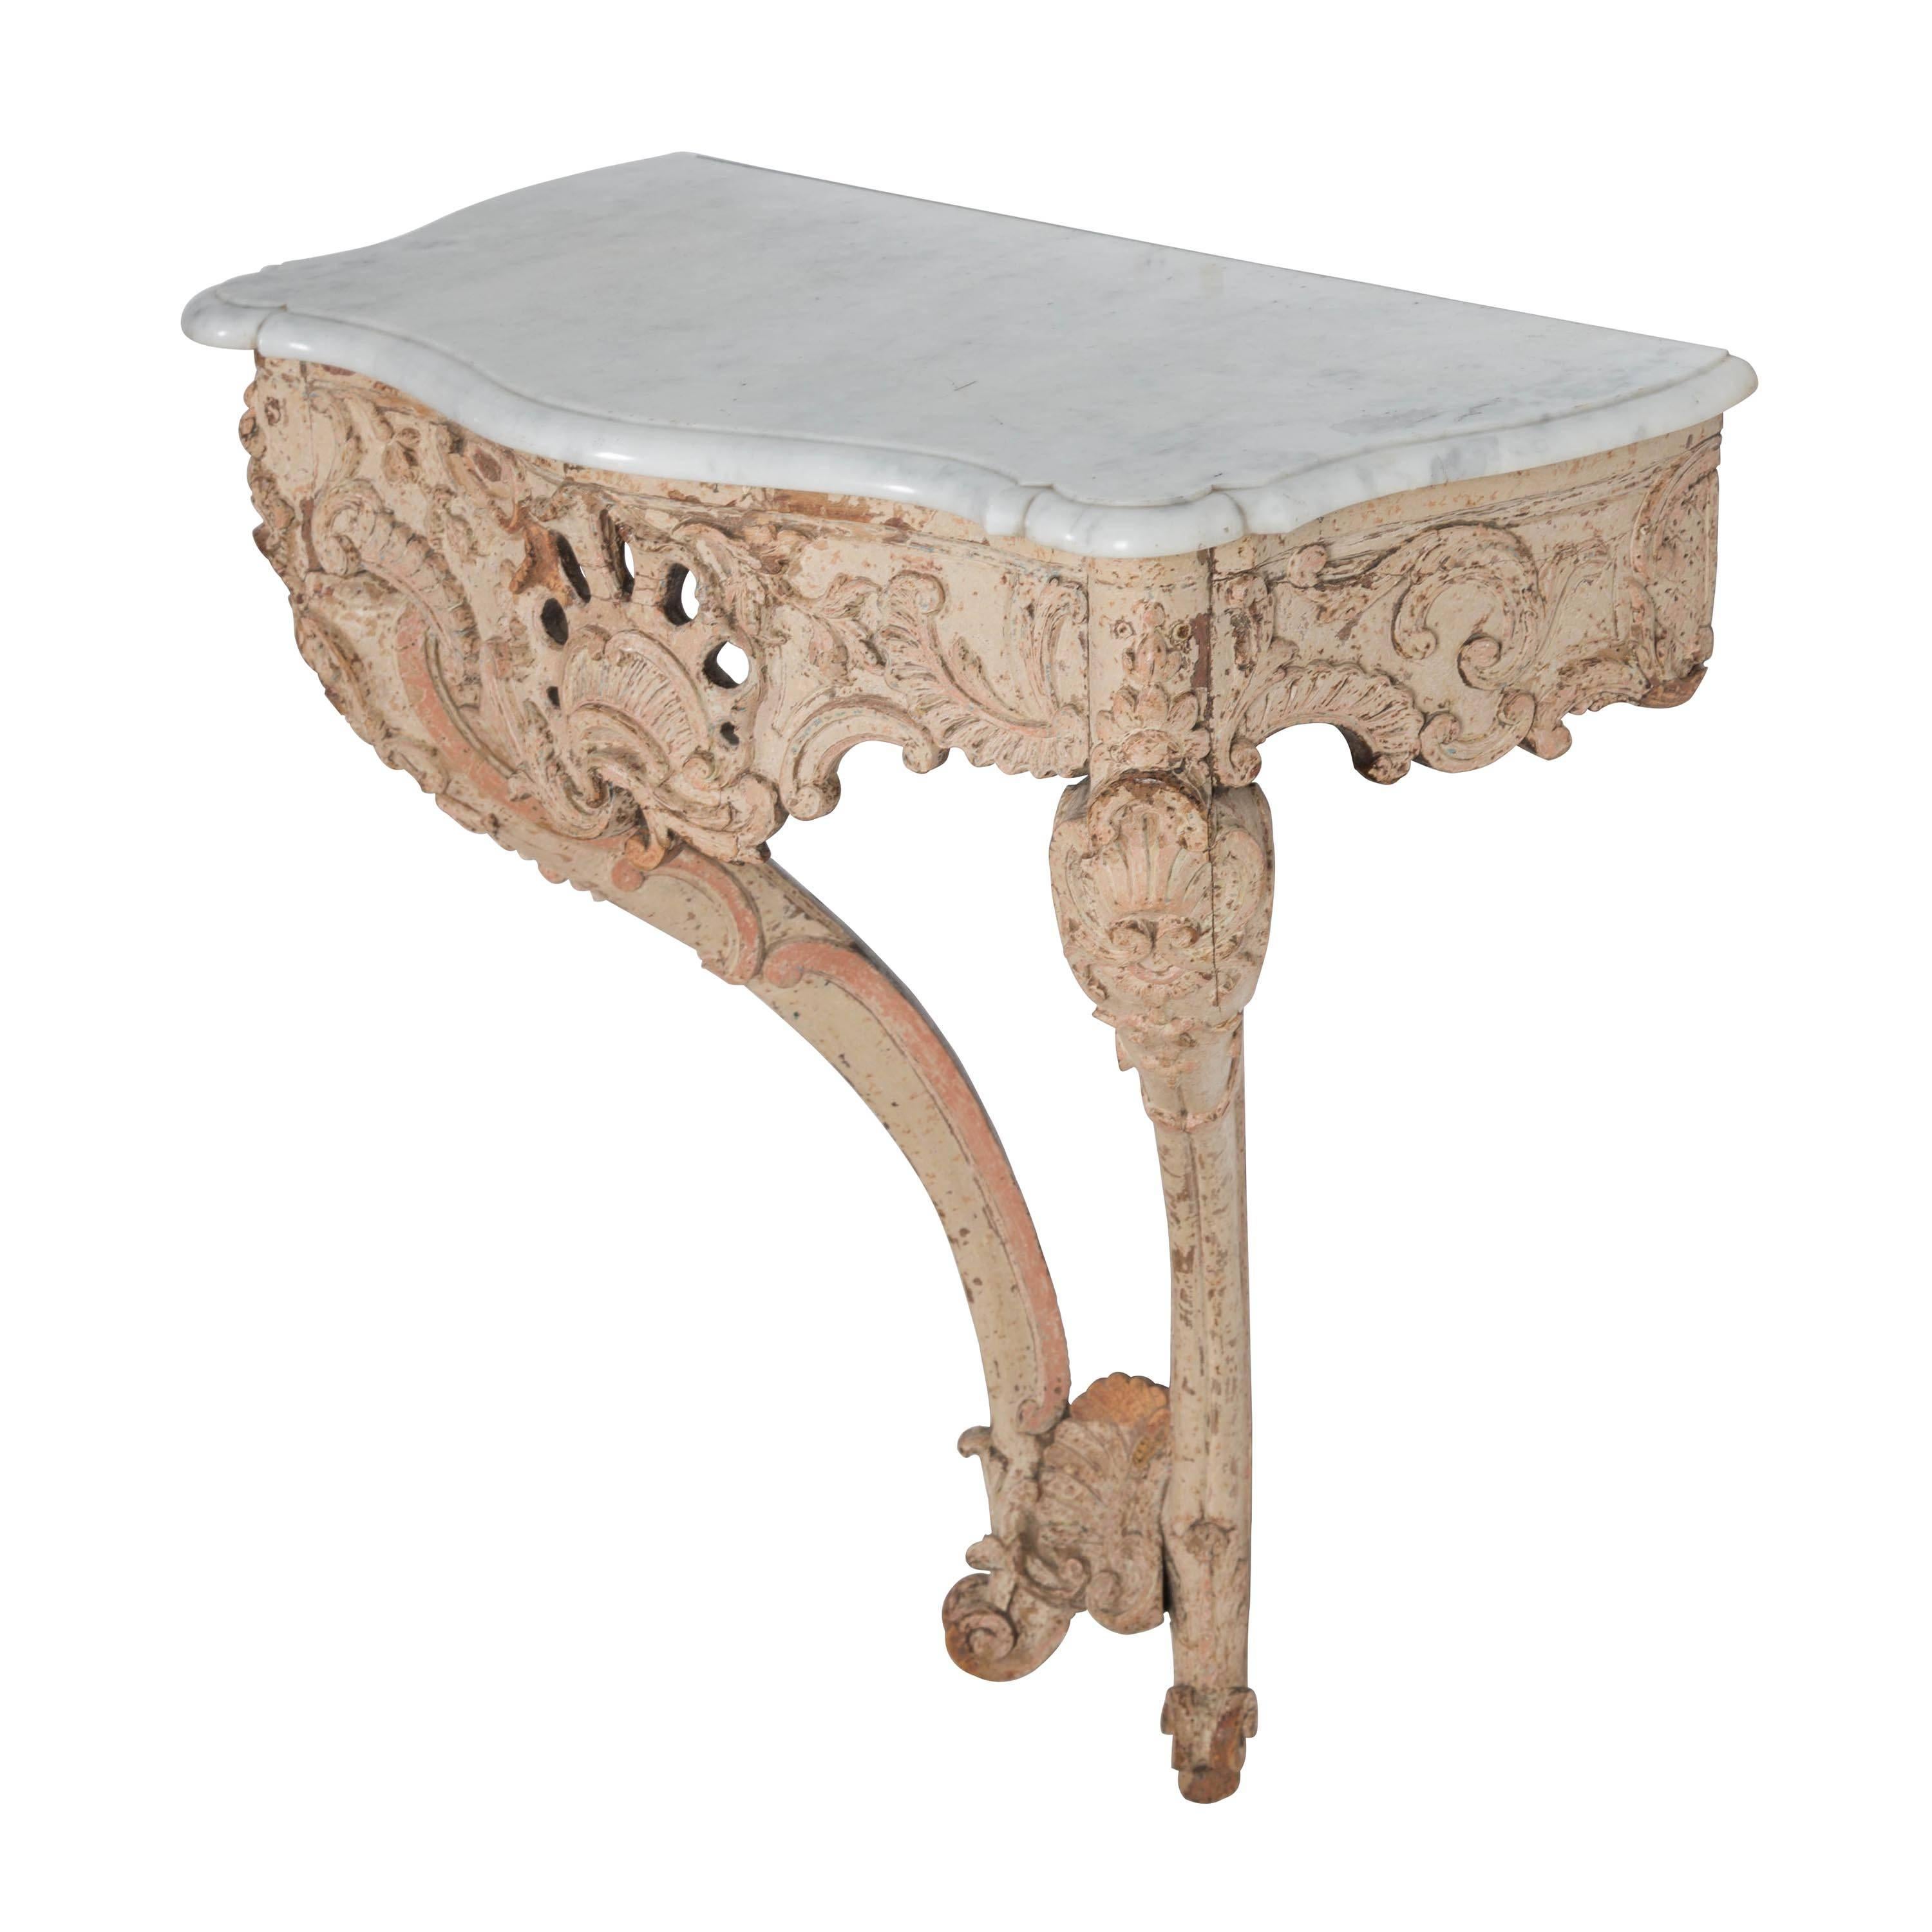 Decorated console table with marble top.